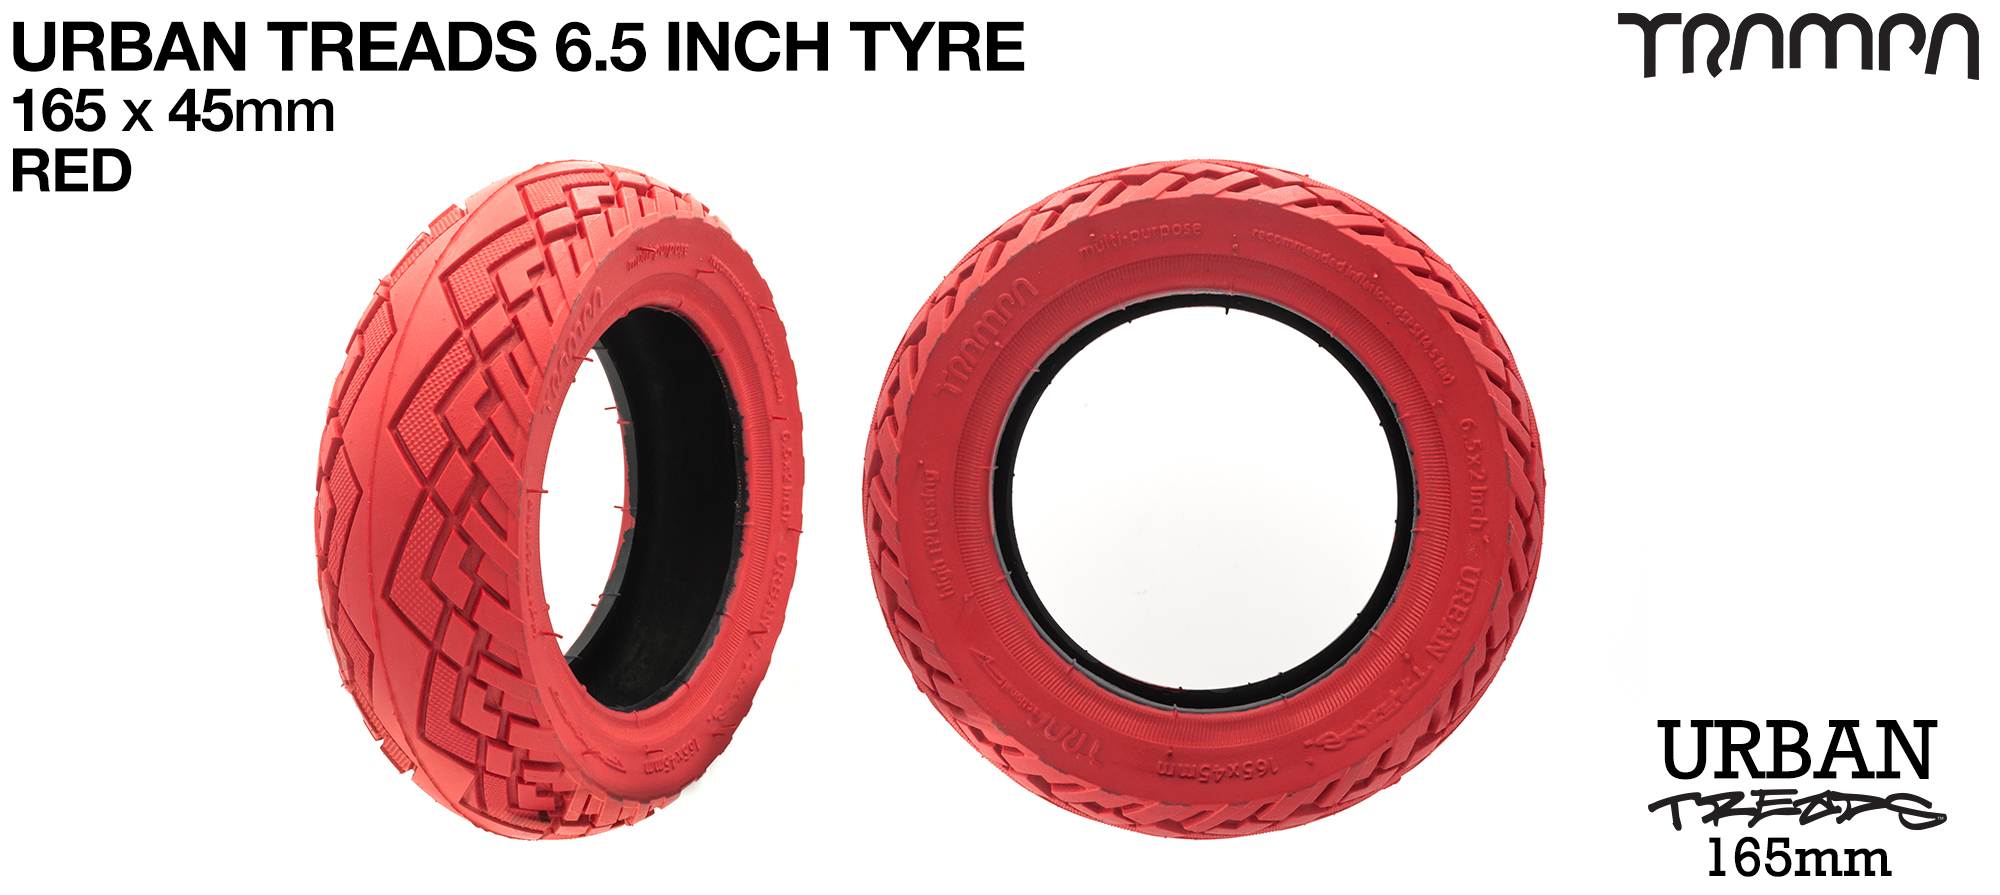 6 Inch URBAN Treads Tyre - RED x4